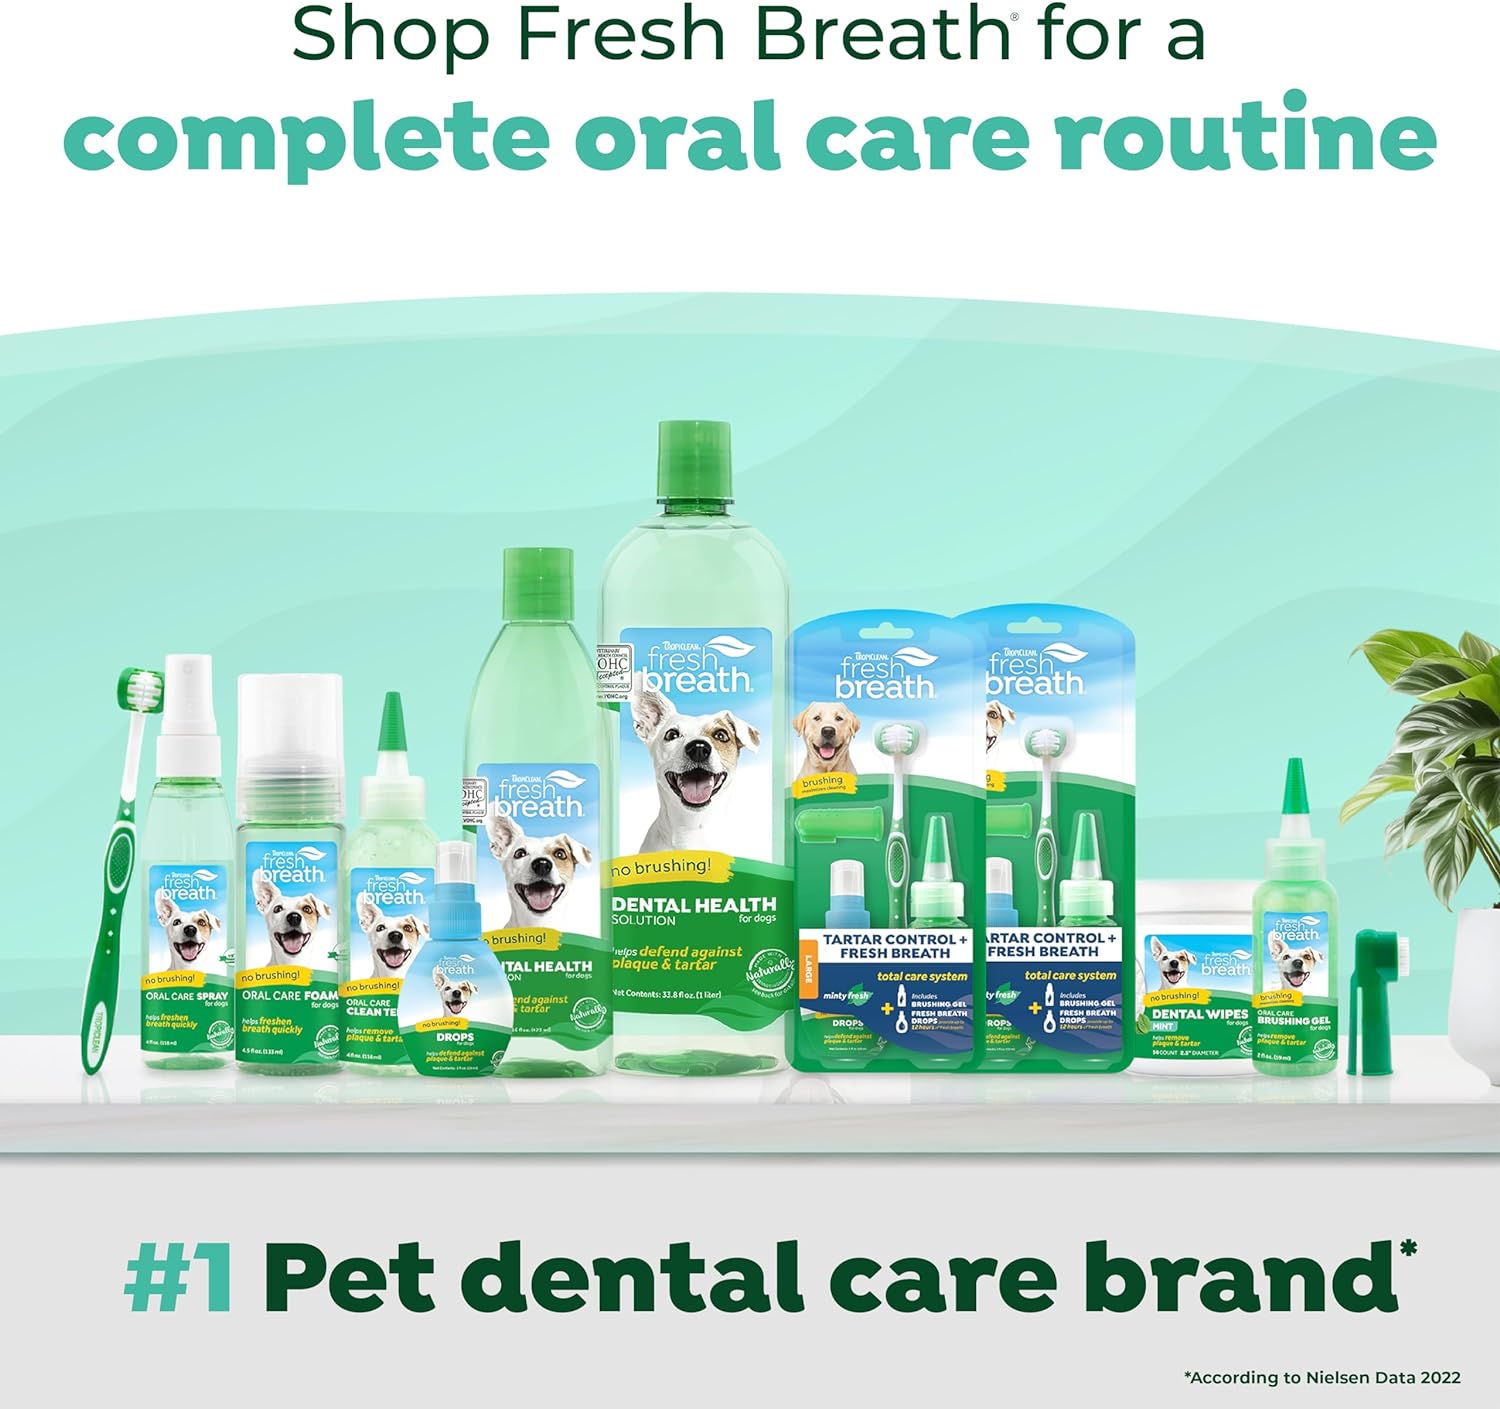 TropiClean Fresh Breath Original | Dog Oral Care Water Additive | Dog Breath Freshener Additive for Dental Health | VOHC Certified | Made in the USA | 33.8 oz. | Pack of 3